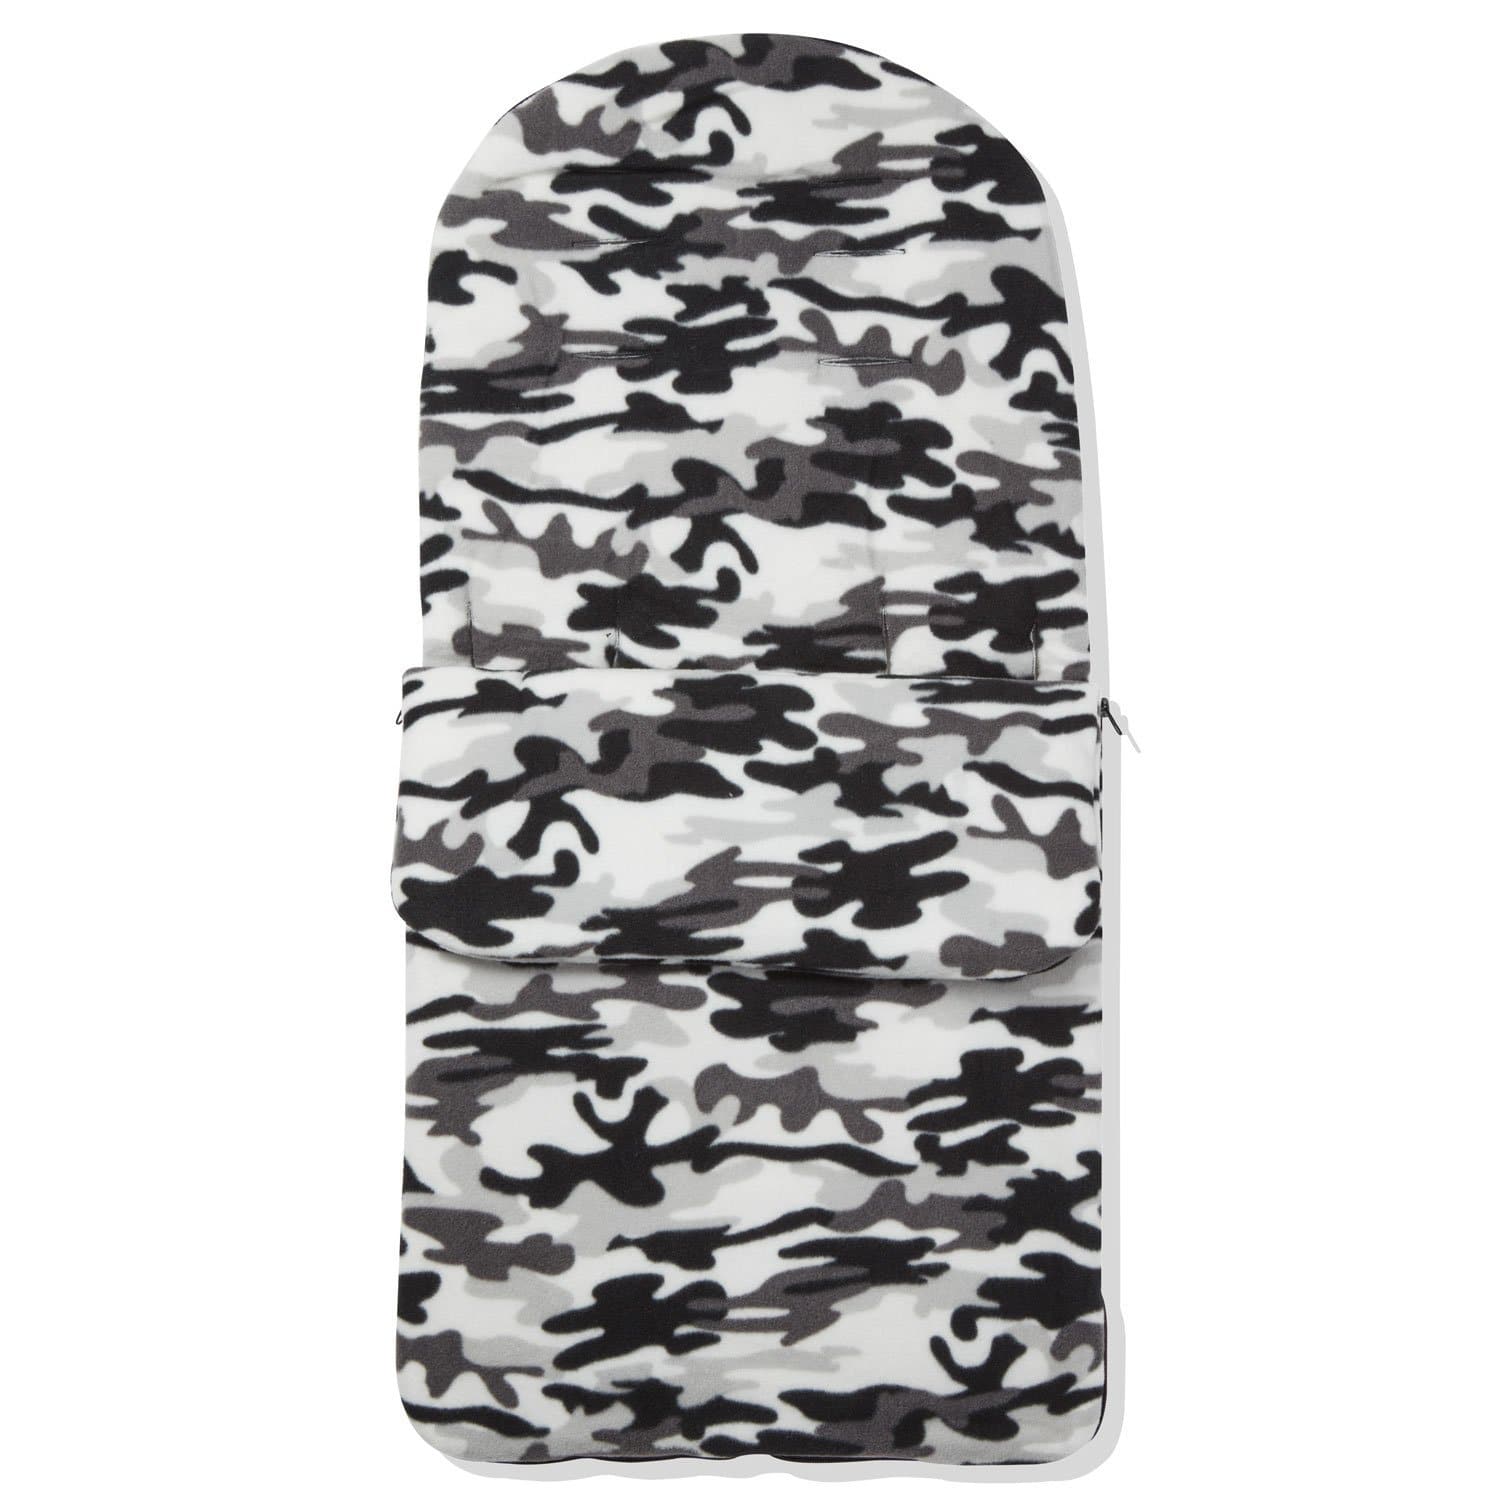 Fleece Footmuff / Cosy Toes Compatible with Babyzen - Grey Camouflage / Fits All Models | For Your Little One